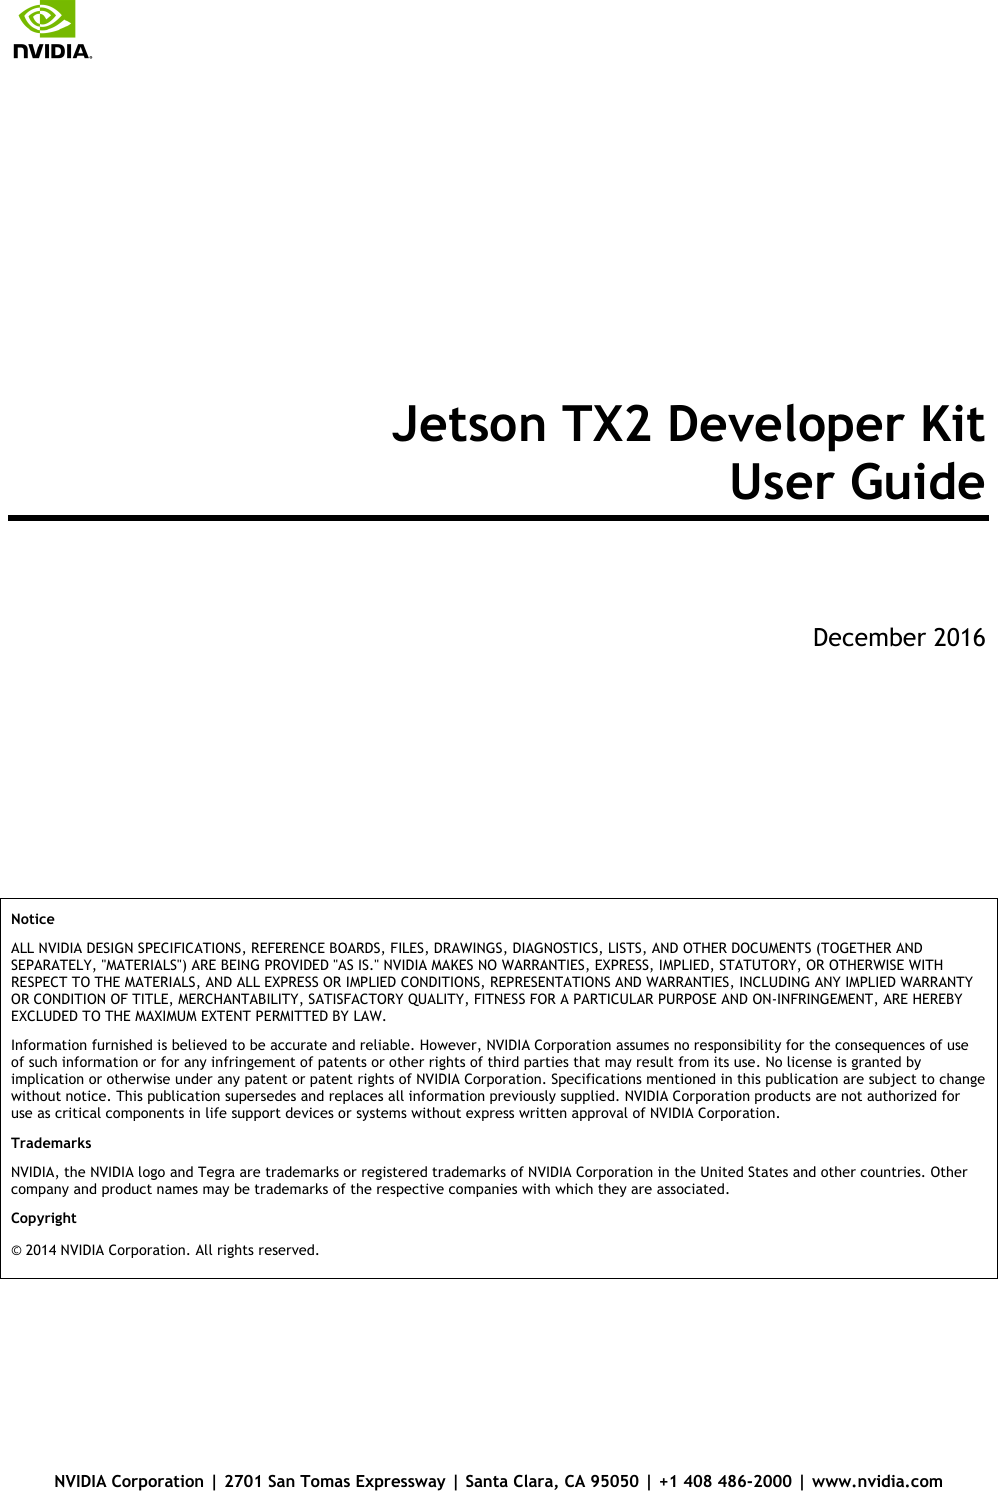       NVIDIA Corporation | 2701 San Tomas Expressway | Santa Clara, CA 95050 | +1 408 486-2000 | www.nvidia.com Jetson TX2 Developer Kit  User Guide   December 2016      Notice  ALL NVIDIA DESIGN SPECIFICATIONS, REFERENCE BOARDS, FILES, DRAWINGS, DIAGNOSTICS, LISTS, AND OTHER DOCUMENTS (TOGETHER AND SEPARATELY, &quot;MATERIALS&quot;) ARE BEING PROVIDED &quot;AS IS.&quot; NVIDIA MAKES NO WARRANTIES, EXPRESS, IMPLIED, STATUTORY, OR OTHERWISE WITH RESPECT TO THE MATERIALS, AND ALL EXPRESS OR IMPLIED CONDITIONS, REPRESENTATIONS AND WARRANTIES, INCLUDING ANY IMPLIED WARRANTY OR CONDITION OF TITLE, MERCHANTABILITY, SATISFACTORY QUALITY, FITNESS FOR A PARTICULAR PURPOSE AND ON-INFRINGEMENT, ARE HEREBY EXCLUDED TO THE MAXIMUM EXTENT PERMITTED BY LAW.  Information furnished is believed to be accurate and reliable. However, NVIDIA Corporation assumes no responsibility for the consequences of use of such information or for any infringement of patents or other rights of third parties that may result from its use. No license is granted by implication or otherwise under any patent or patent rights of NVIDIA Corporation. Specifications mentioned in this publication are subject to change without notice. This publication supersedes and replaces all information previously supplied. NVIDIA Corporation products are not authorized for use as critical components in life support devices or systems without express written approval of NVIDIA Corporation.  Trademarks  NVIDIA, the NVIDIA logo and Tegra are trademarks or registered trademarks of NVIDIA Corporation in the United States and other countries. Other company and product names may be trademarks of the respective companies with which they are associated.  Copyright  © 2014 NVIDIA Corporation. All rights reserved.    